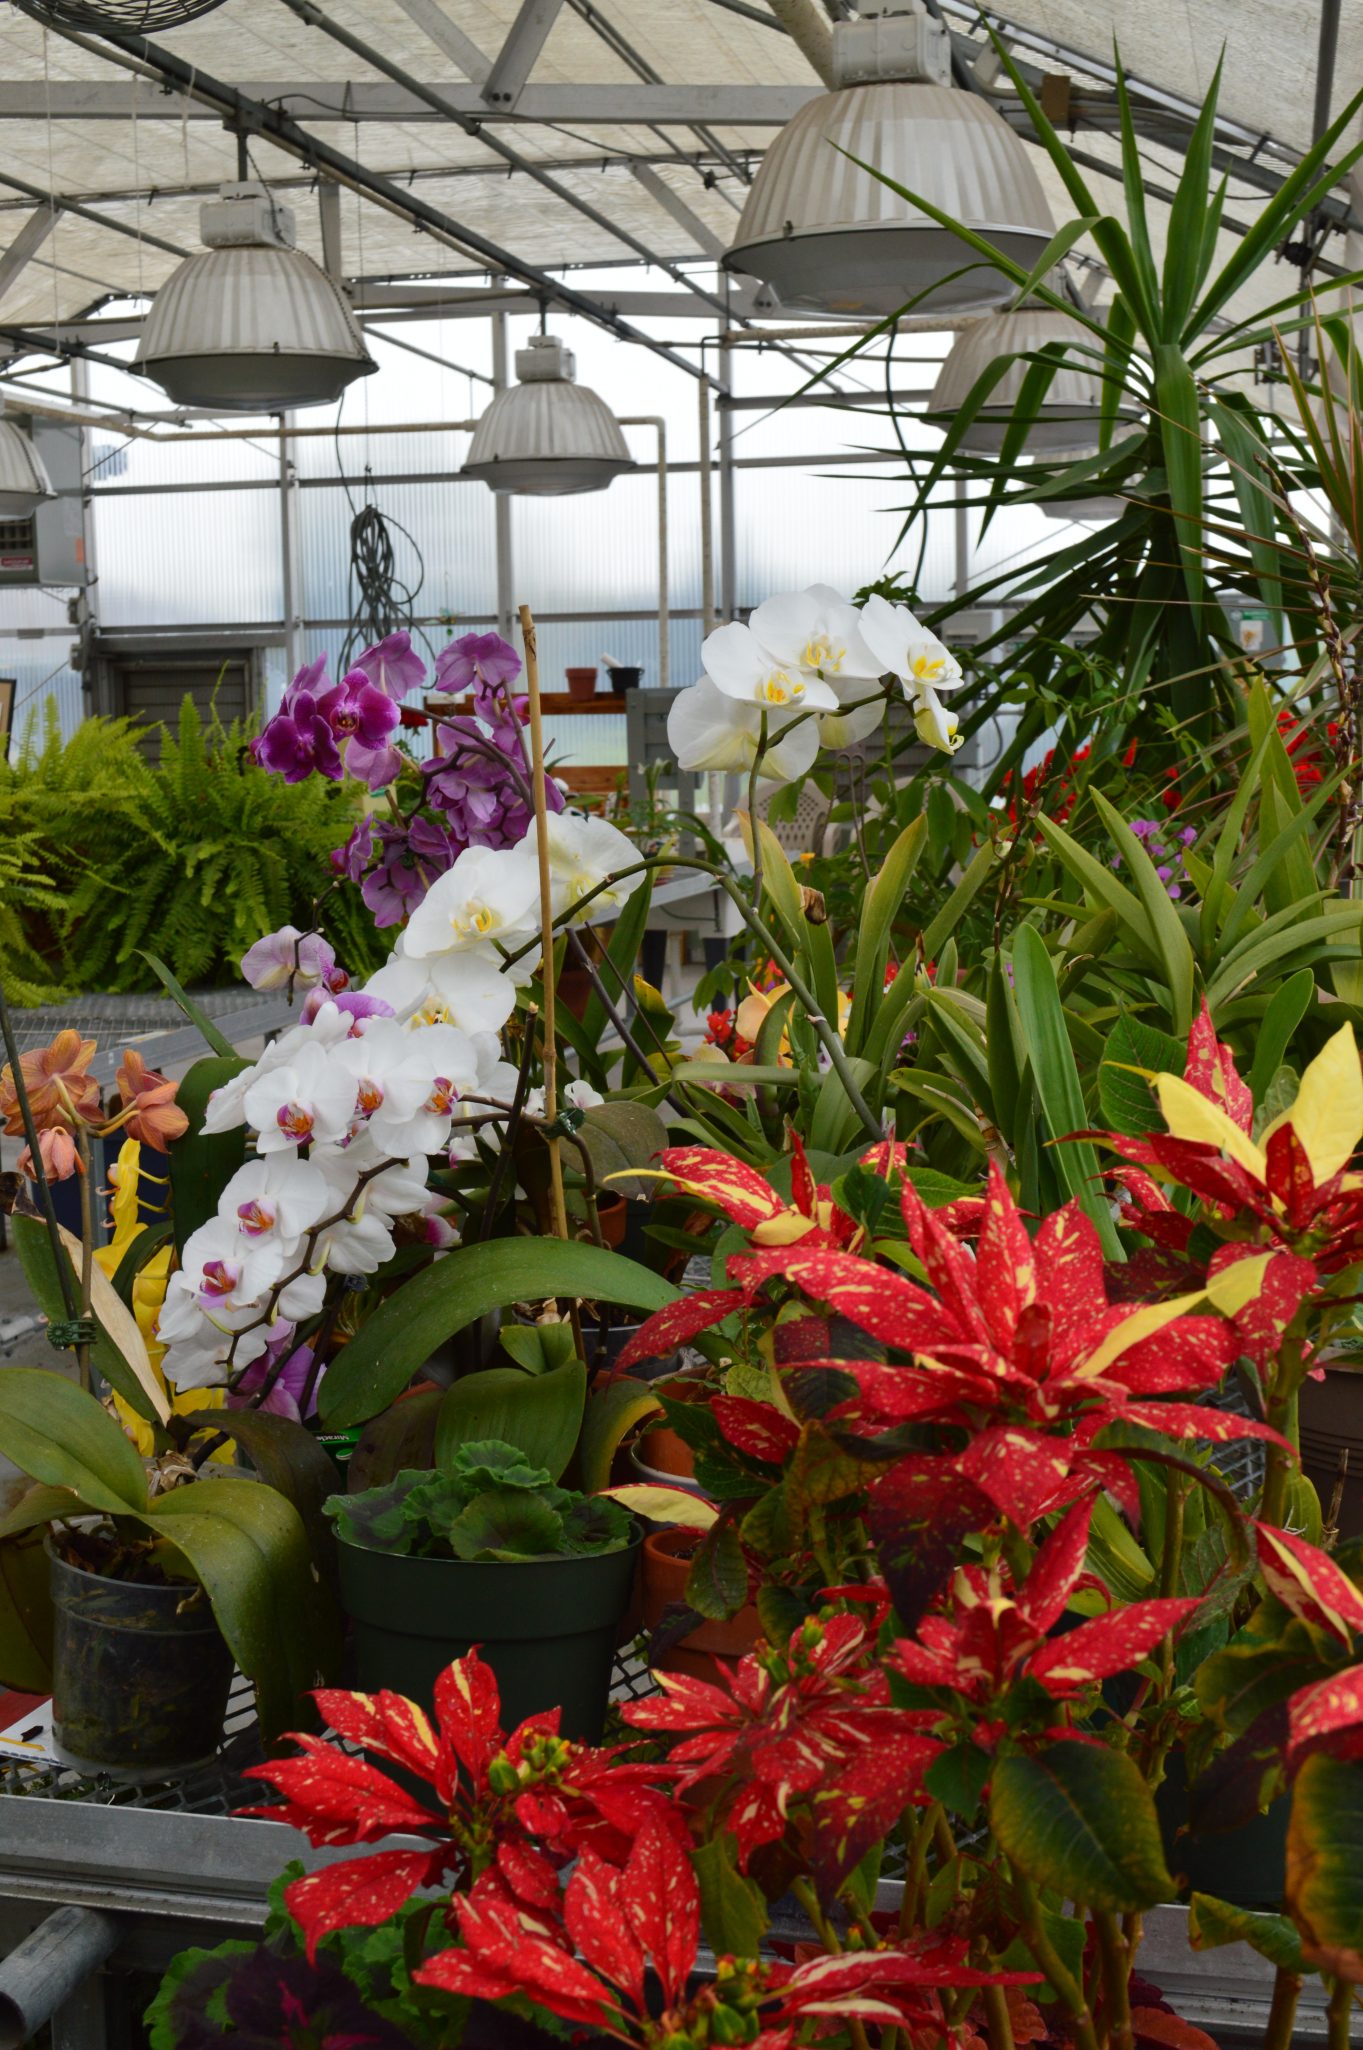 View of a greenhouse full of colorful flowers.